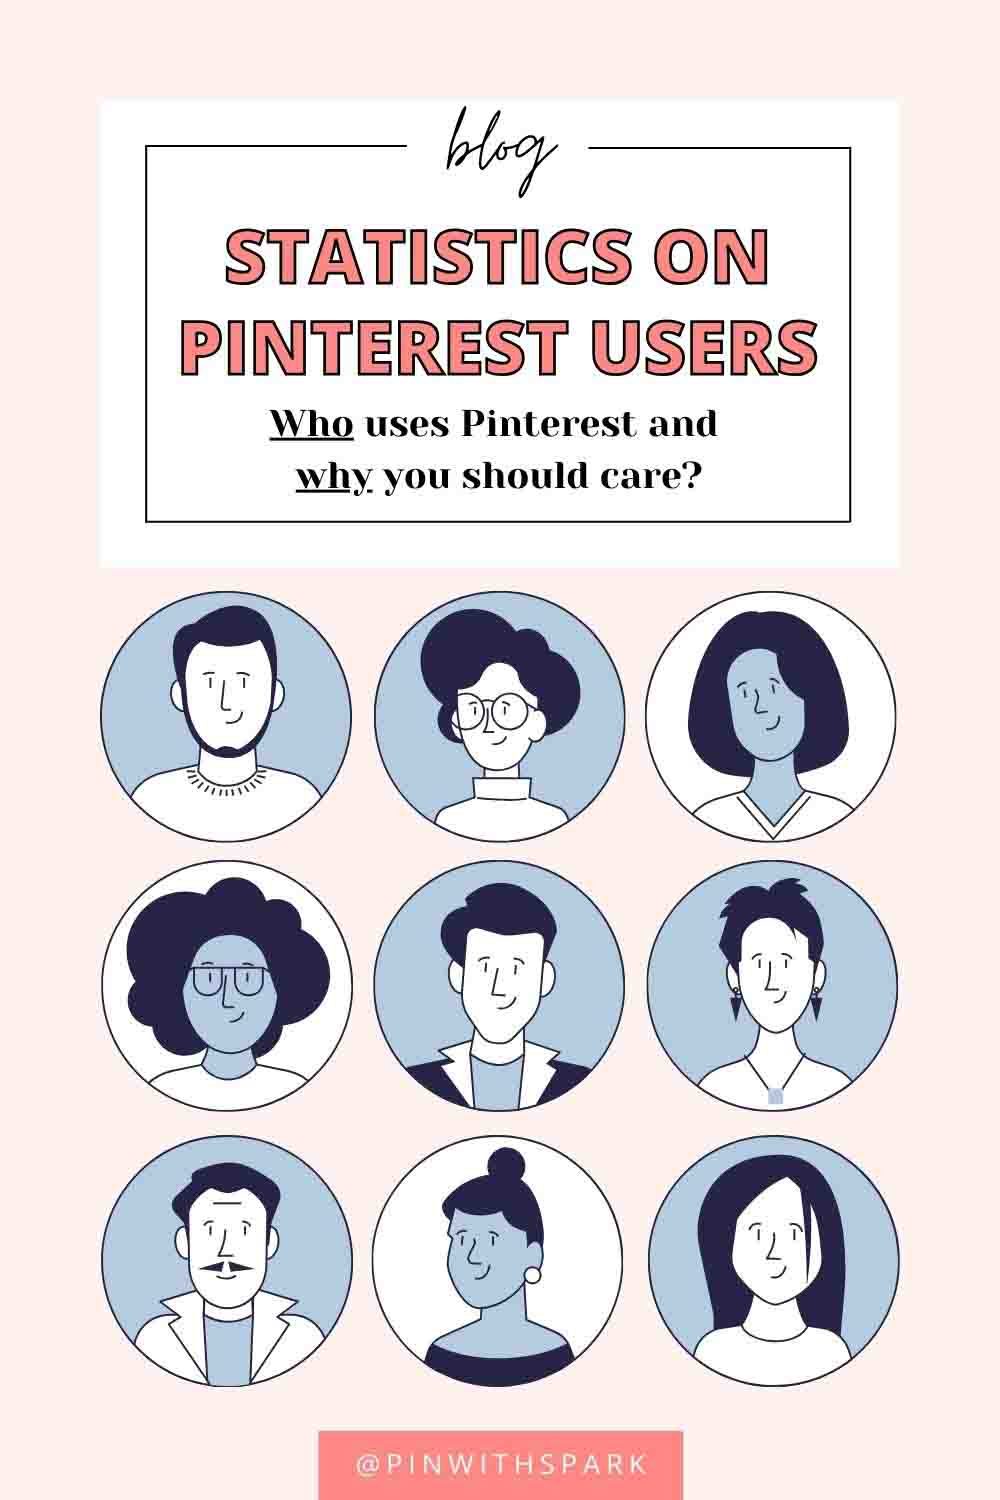 Who uses Pinterest text overlay with different bubbles with cartoon images of people